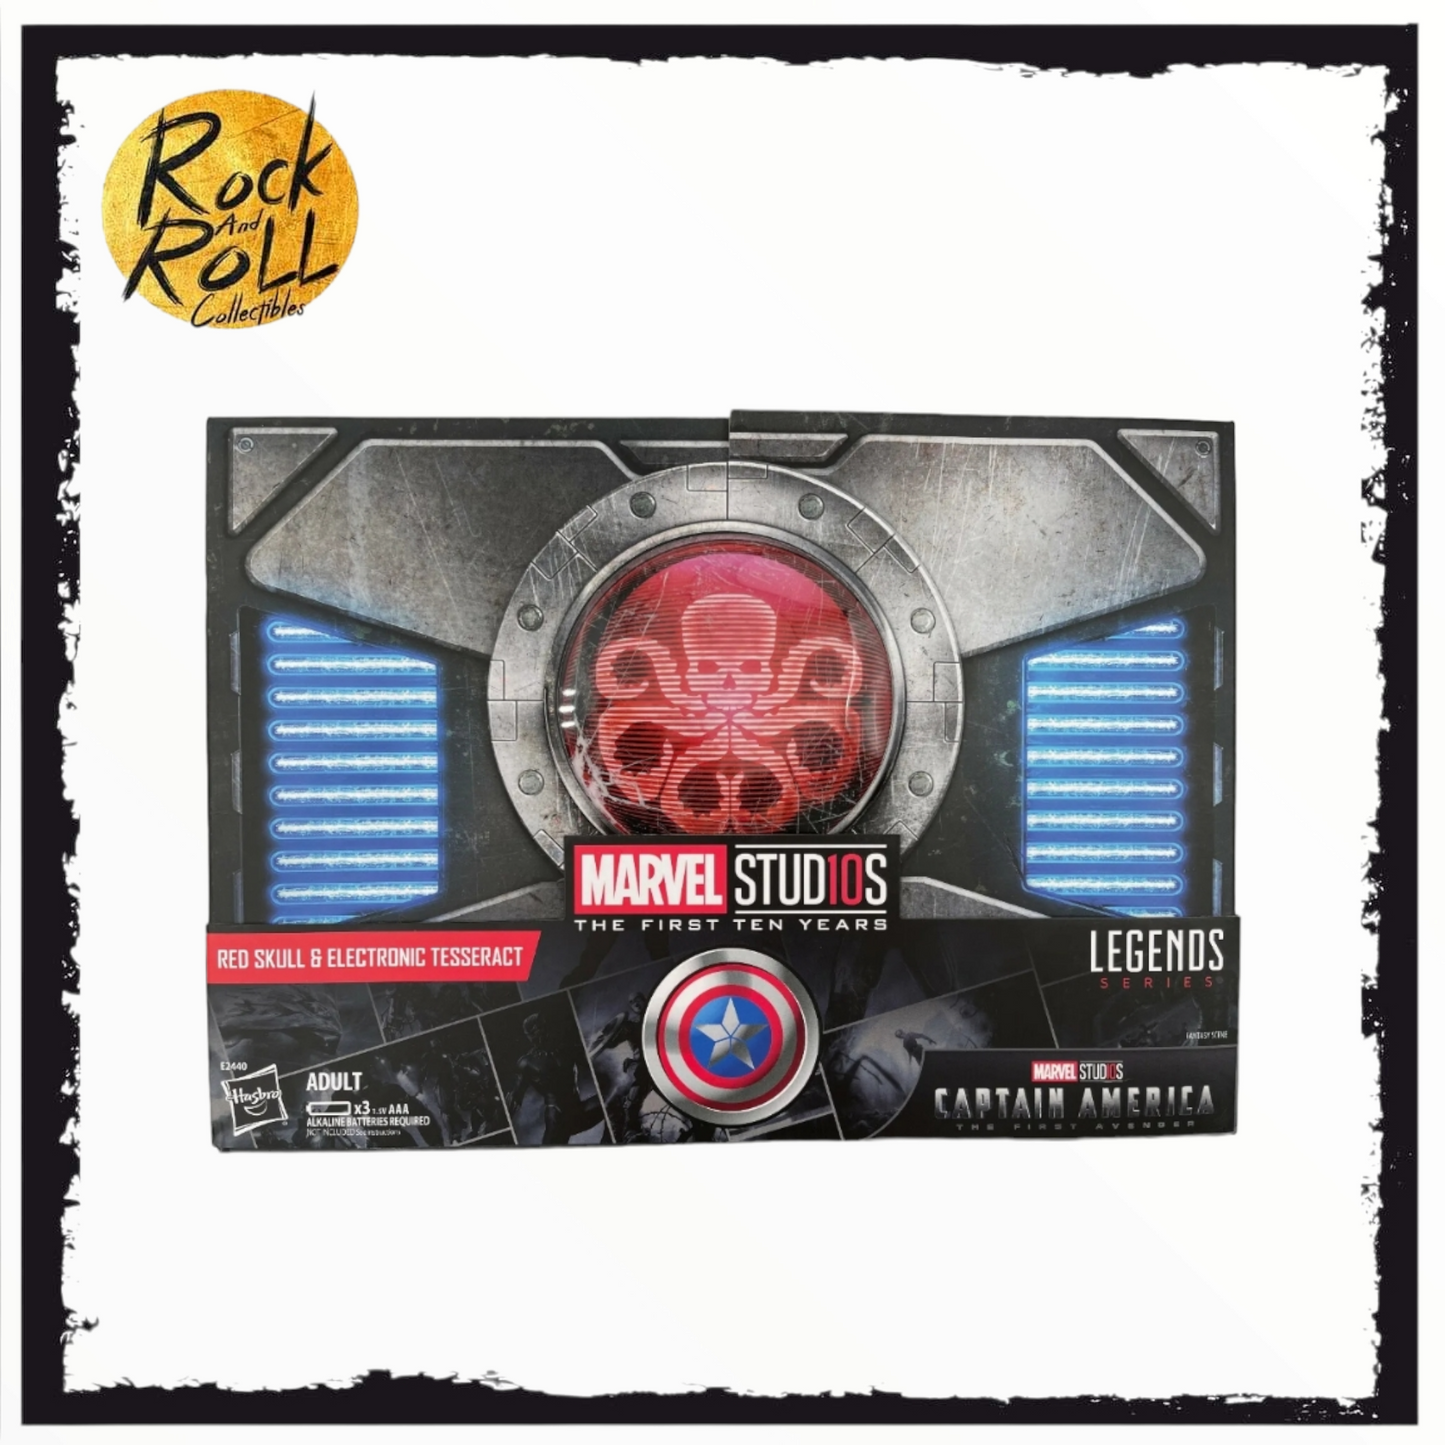 Marvel Legends Red Skull & Electronic Tesseract Hasbro SDCC Exclusive 2018